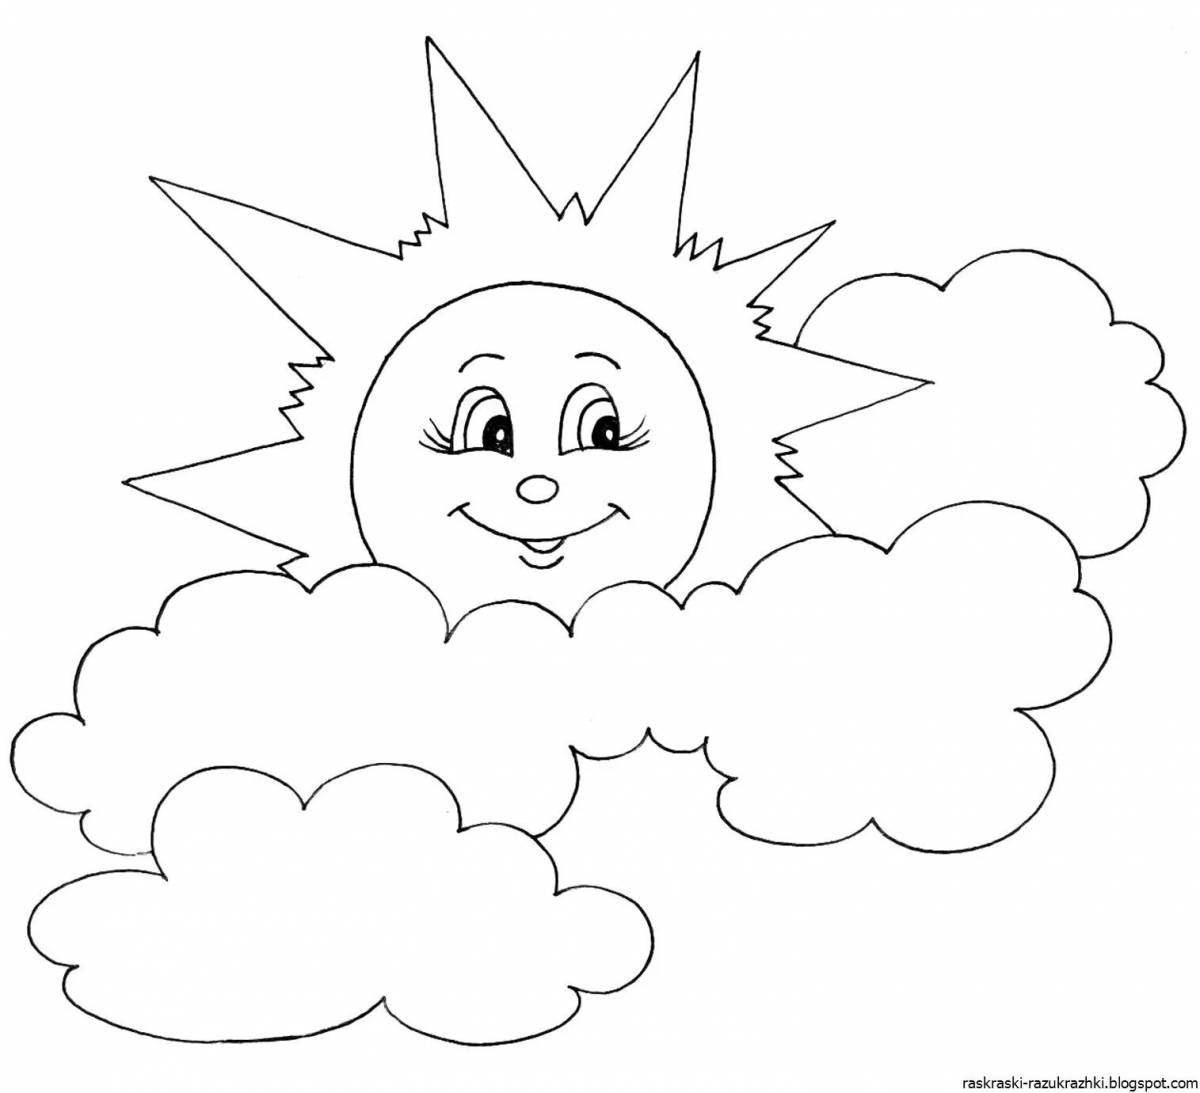 Glitter sun coloring book for 3-4 year olds